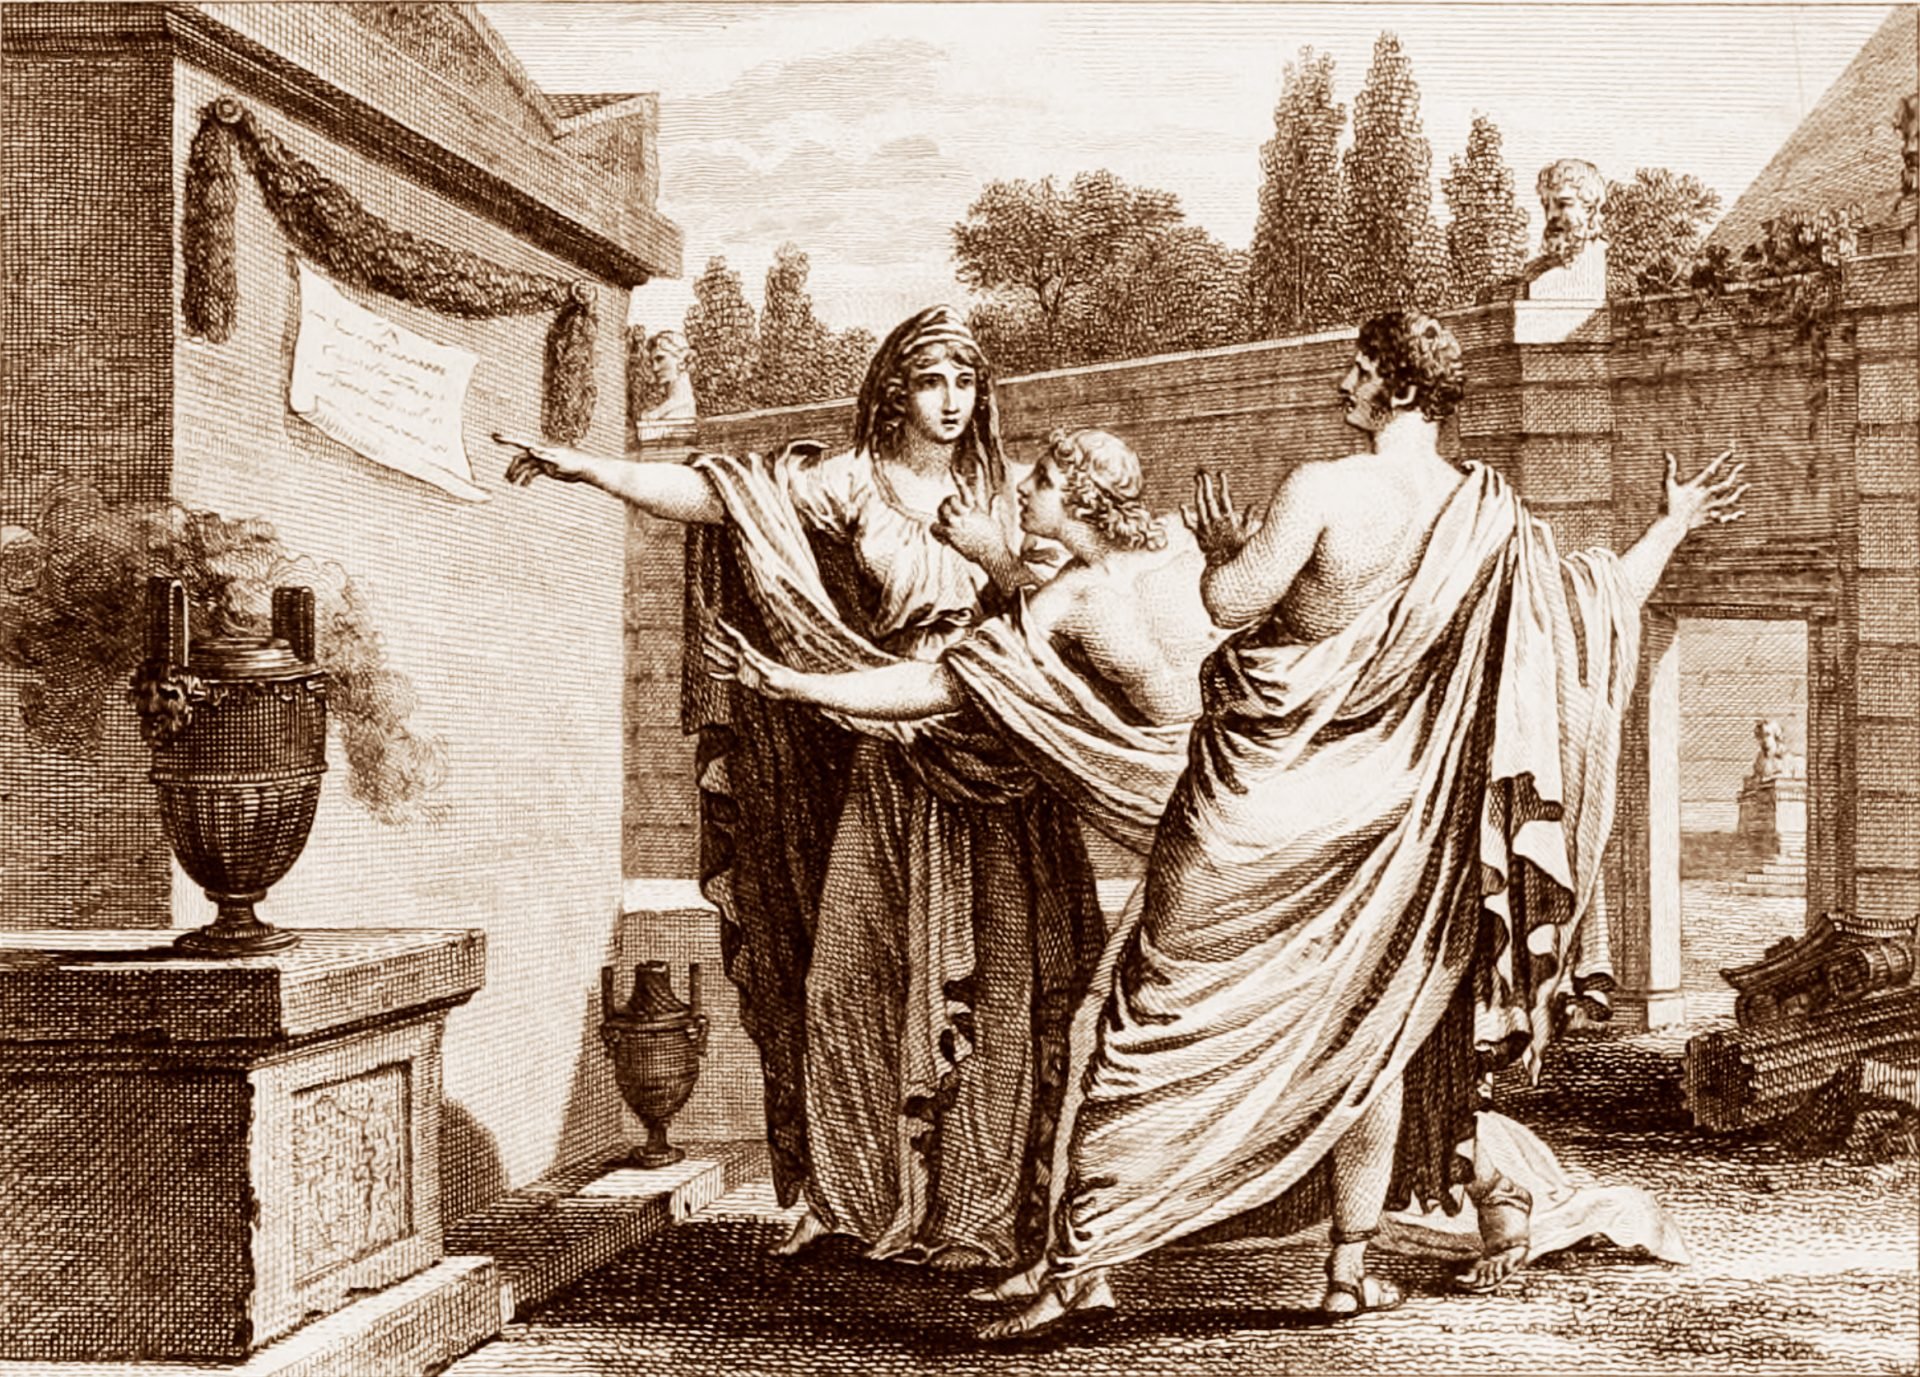 A sepia-toned image of a group of three people in classical Roman clothing standing in front of a large stone structure with an inscription urging them to vote for Tiberius Gracchus. The person on the left is pointing to the inscription.